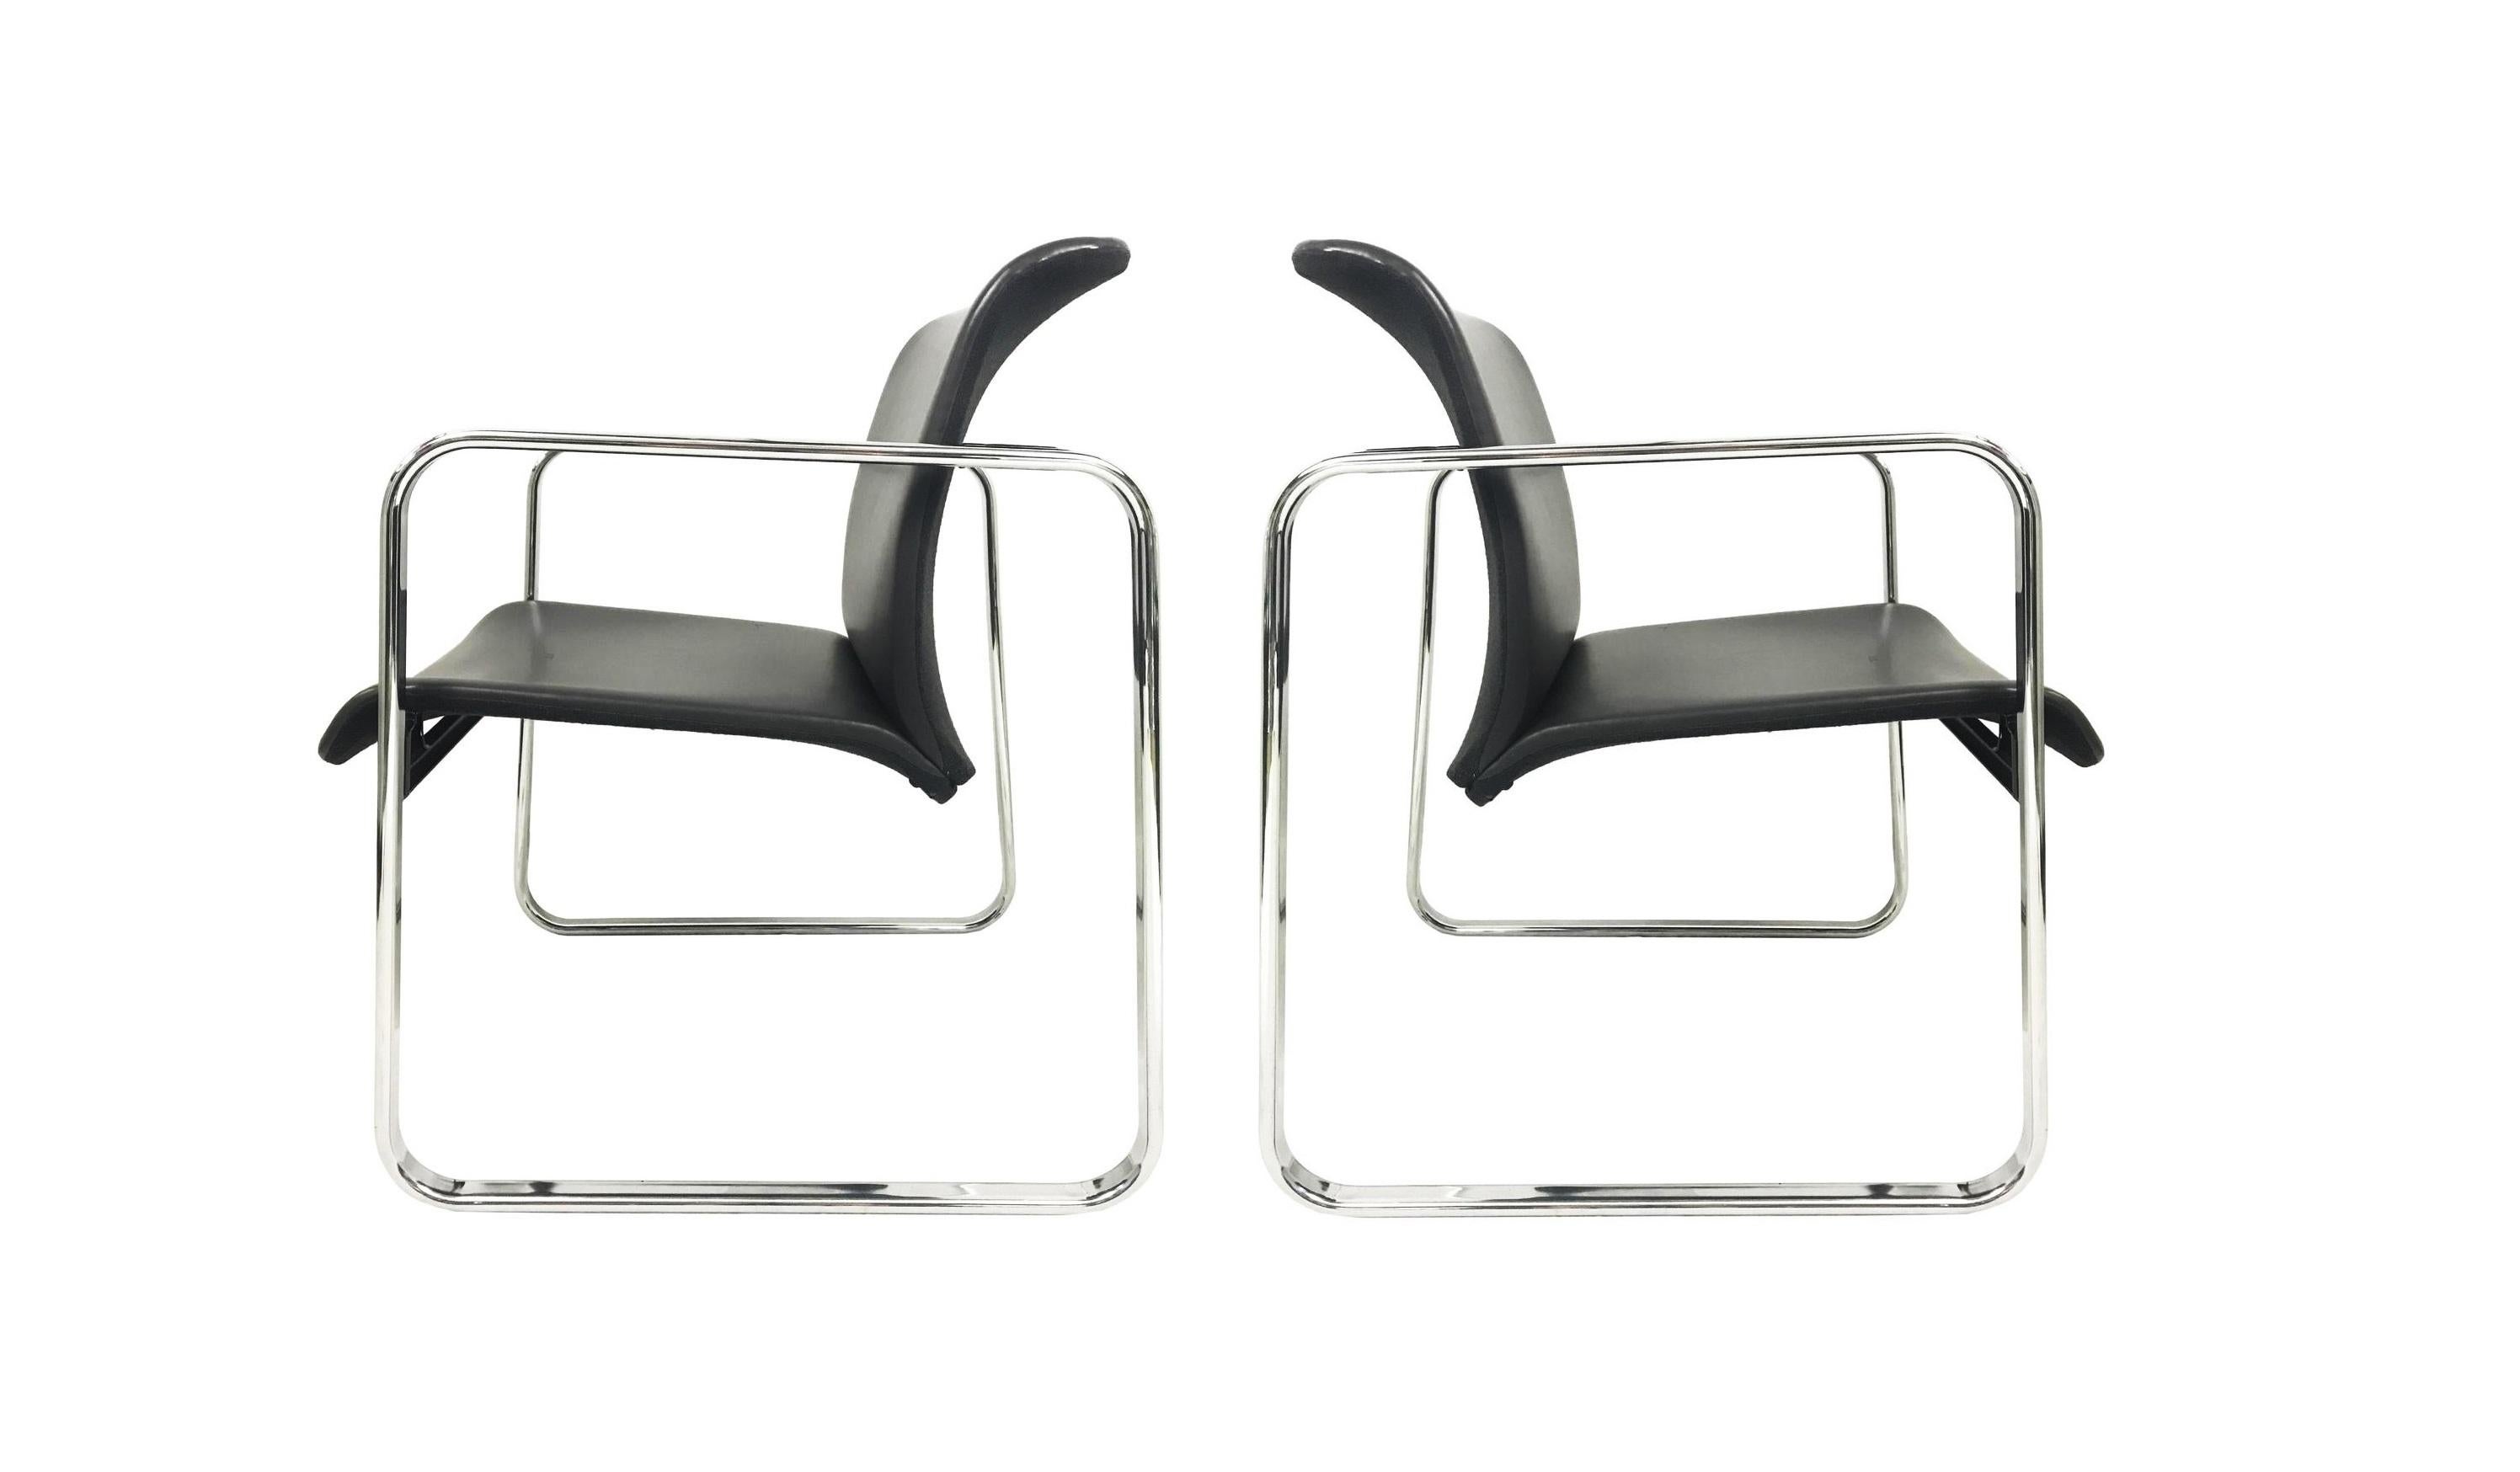 Set of eight tubular series chairs designed by Peter Protzman and Alexander Girard for Herman Miller, circa 1970s. Chairs feature tubular chrome trestle frames which supports the molded and upholstered backs and seats. They are labeled “Herman